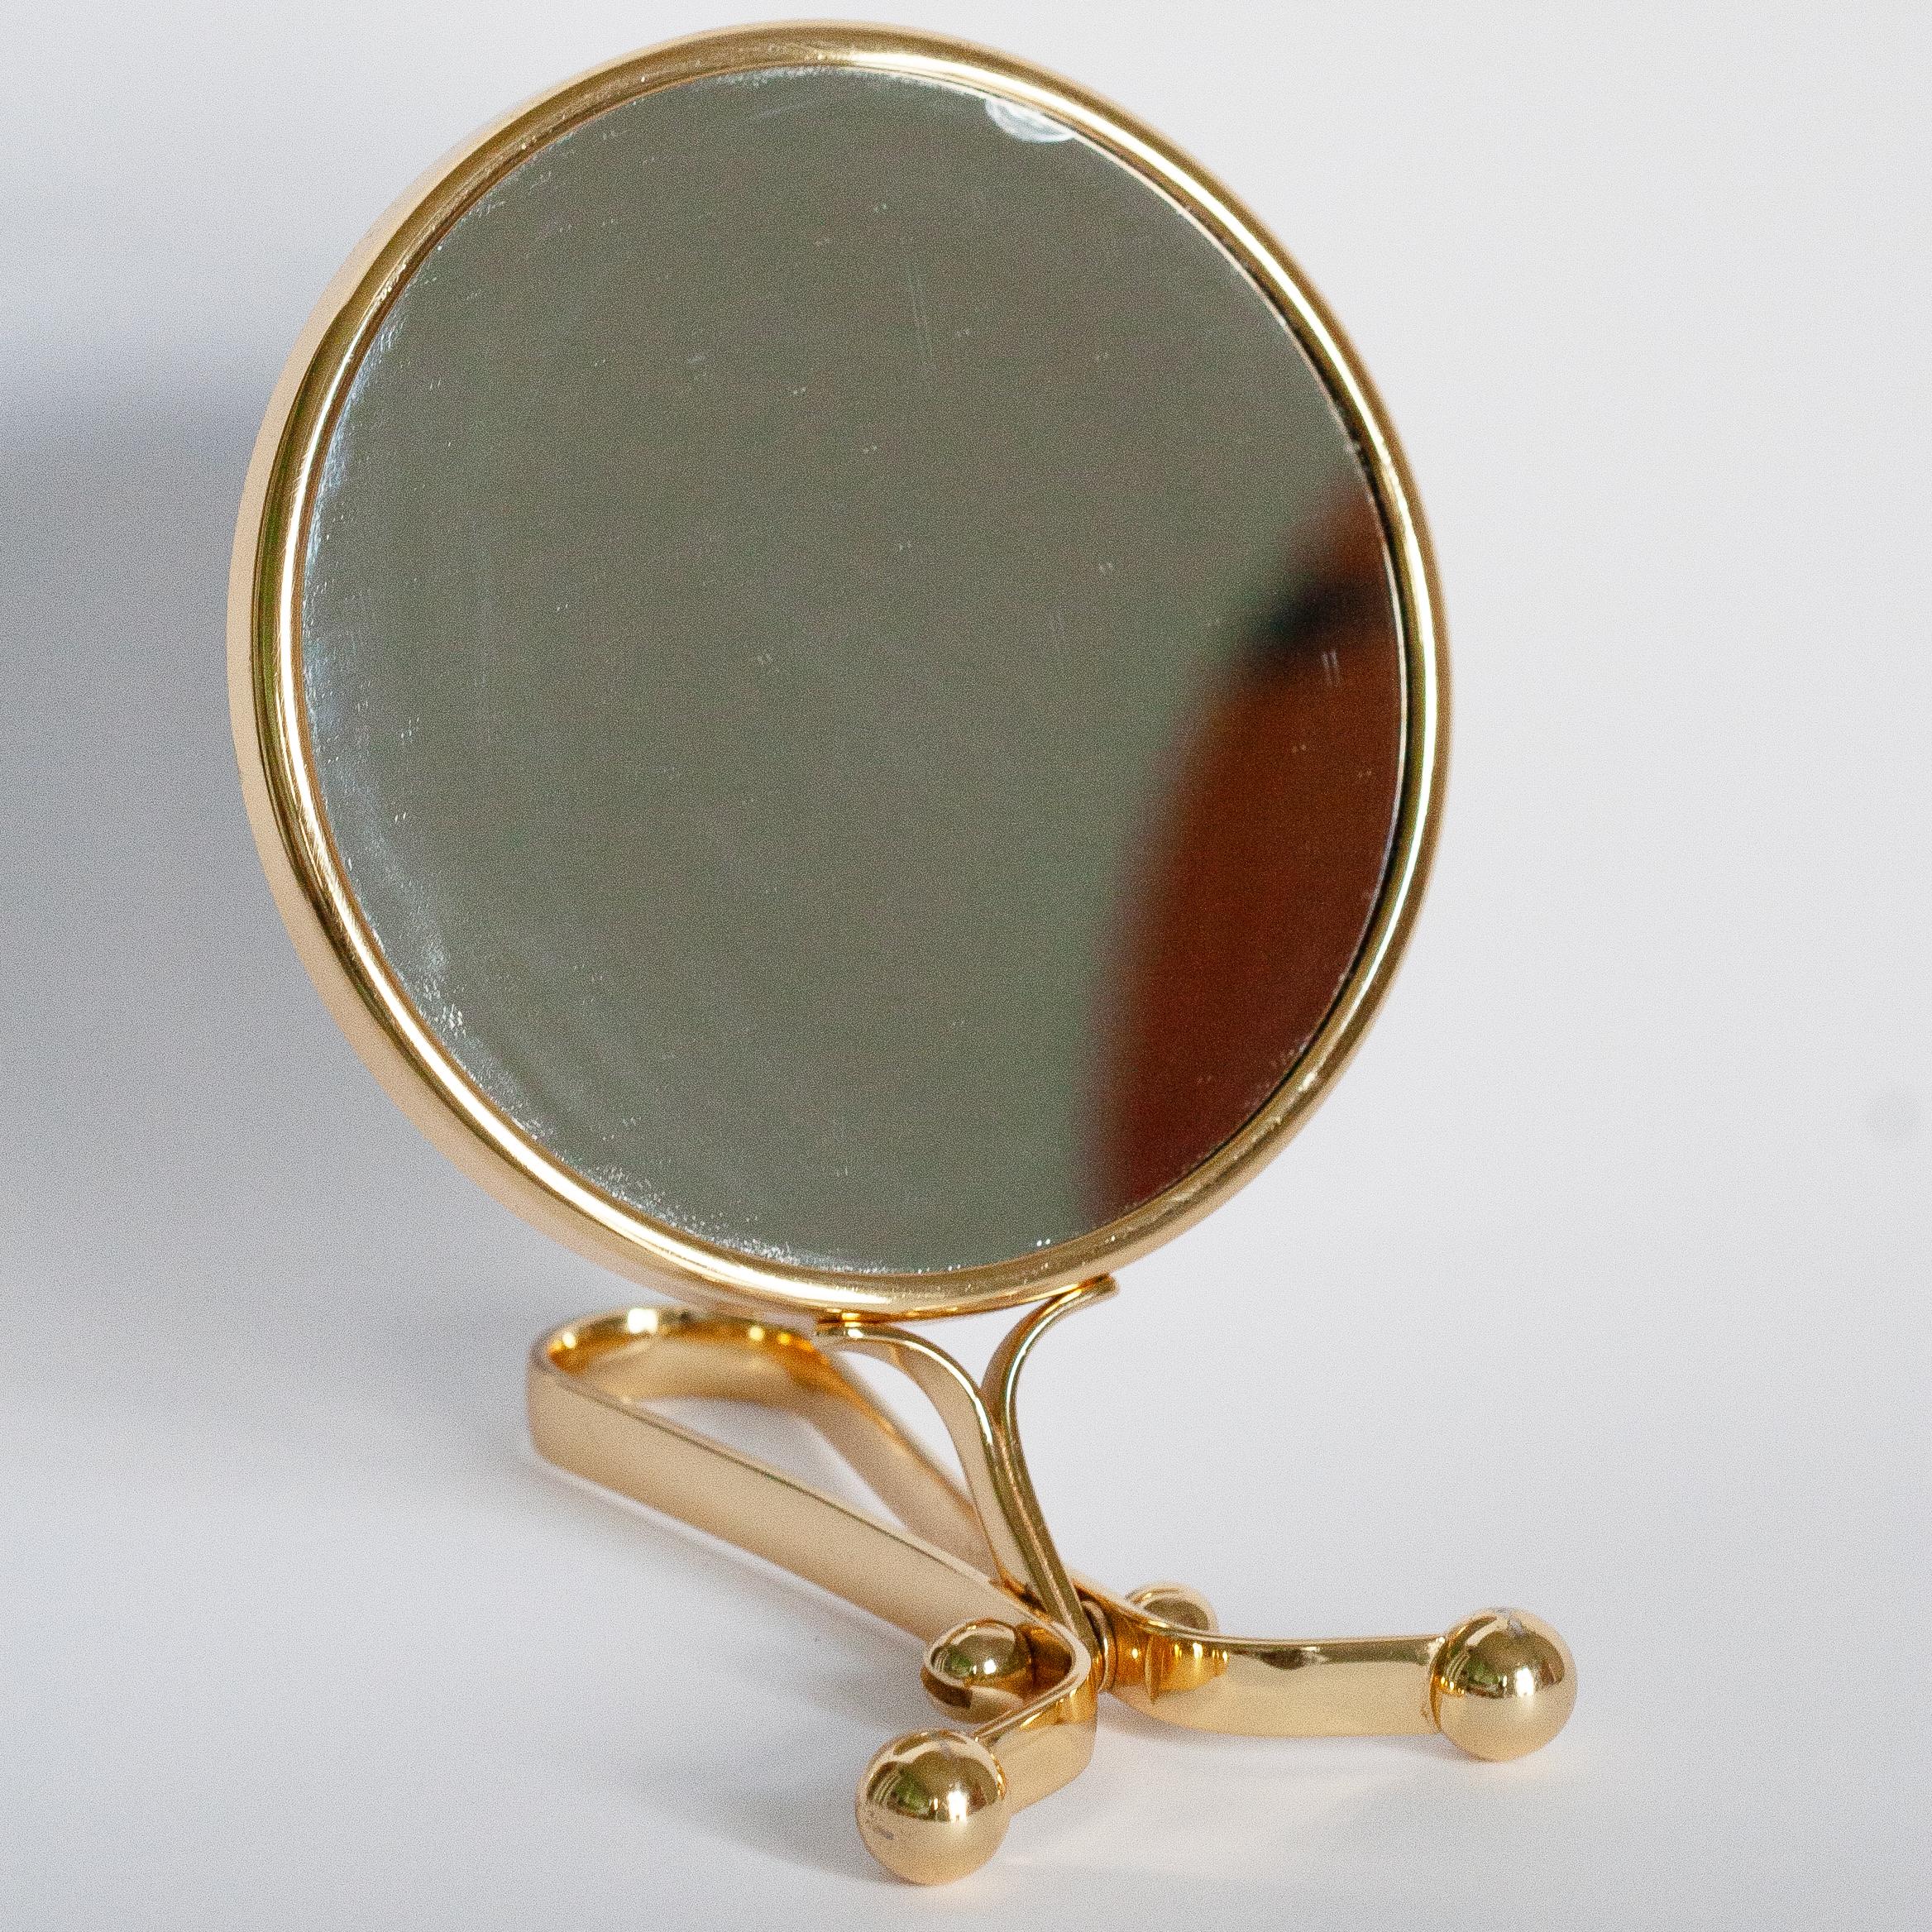 A beautiful mirror in a golden decorative frame from Italy. The frame is made of metal. Mirror is in very good vintage condition - one chip on the mirror - as shown on pictures. Original glass. Really unique piece for every interior! Only one piece